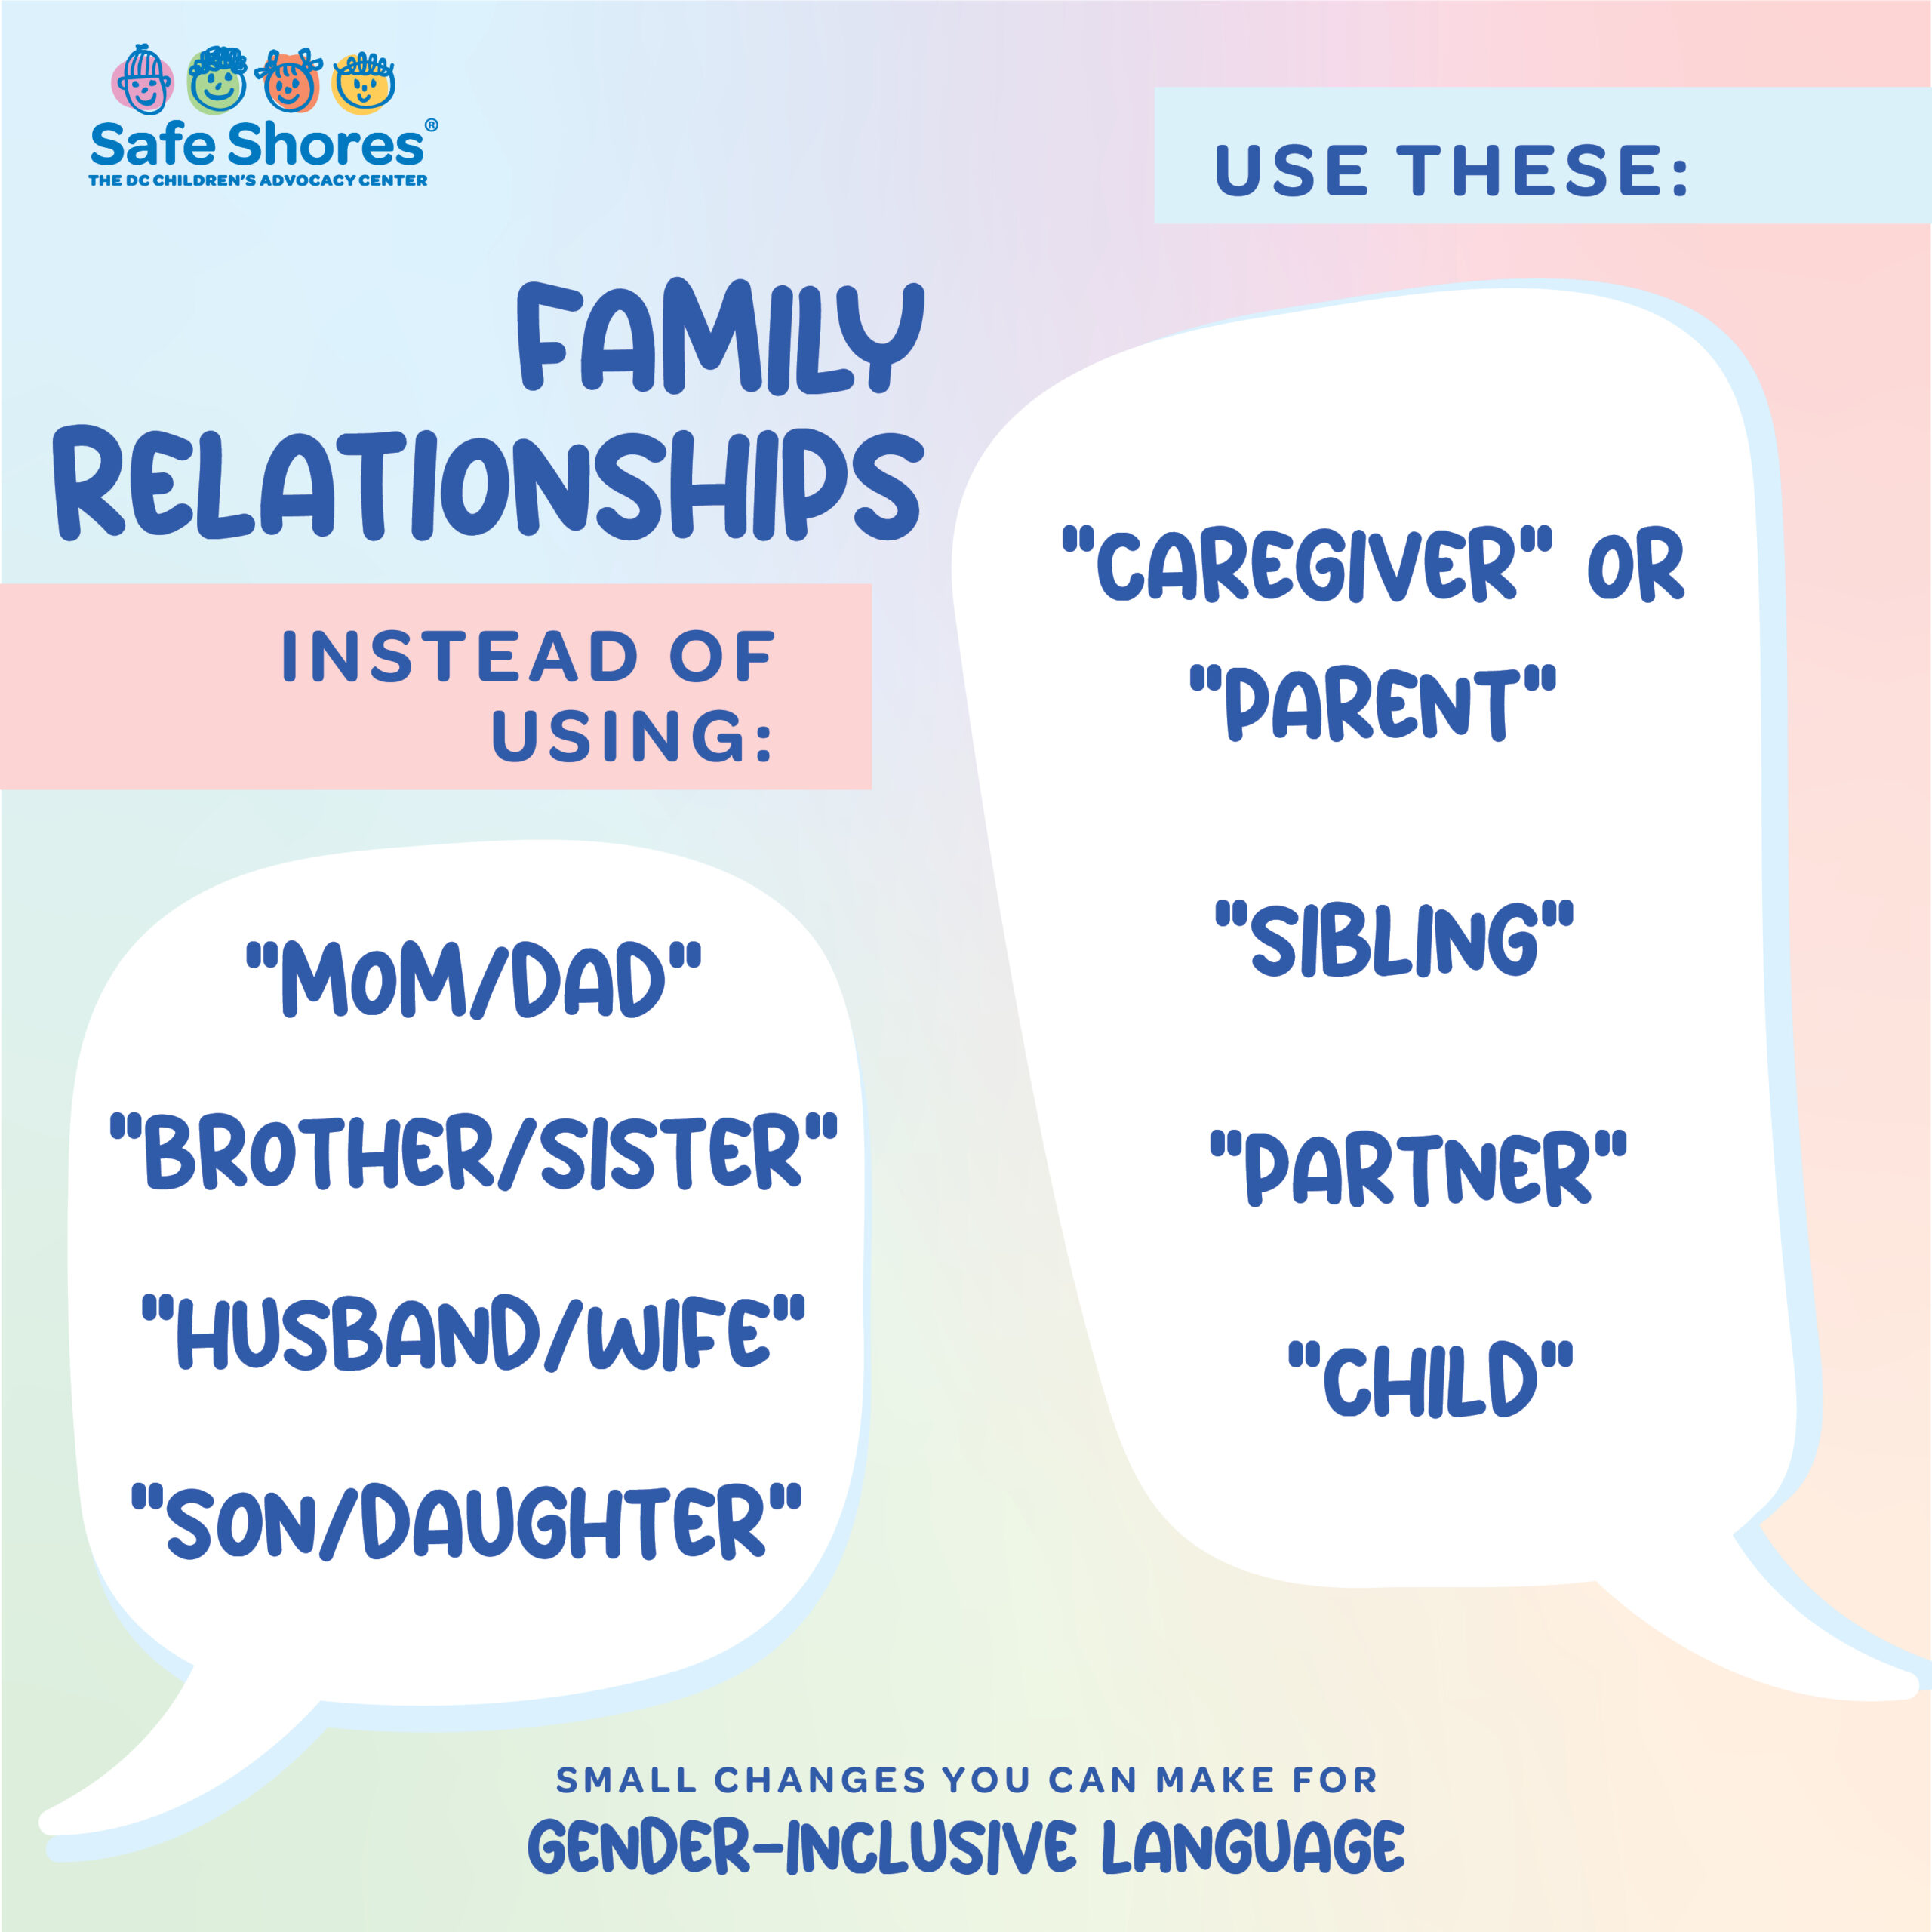 This pastel rainbow image gives gender-inclusive versions of family relationships. Instead of Mom/Dad, say caregiver or parent. Brother/sister becomes sibling. Husband/wife becomes partner. Son/daughter becomes child.